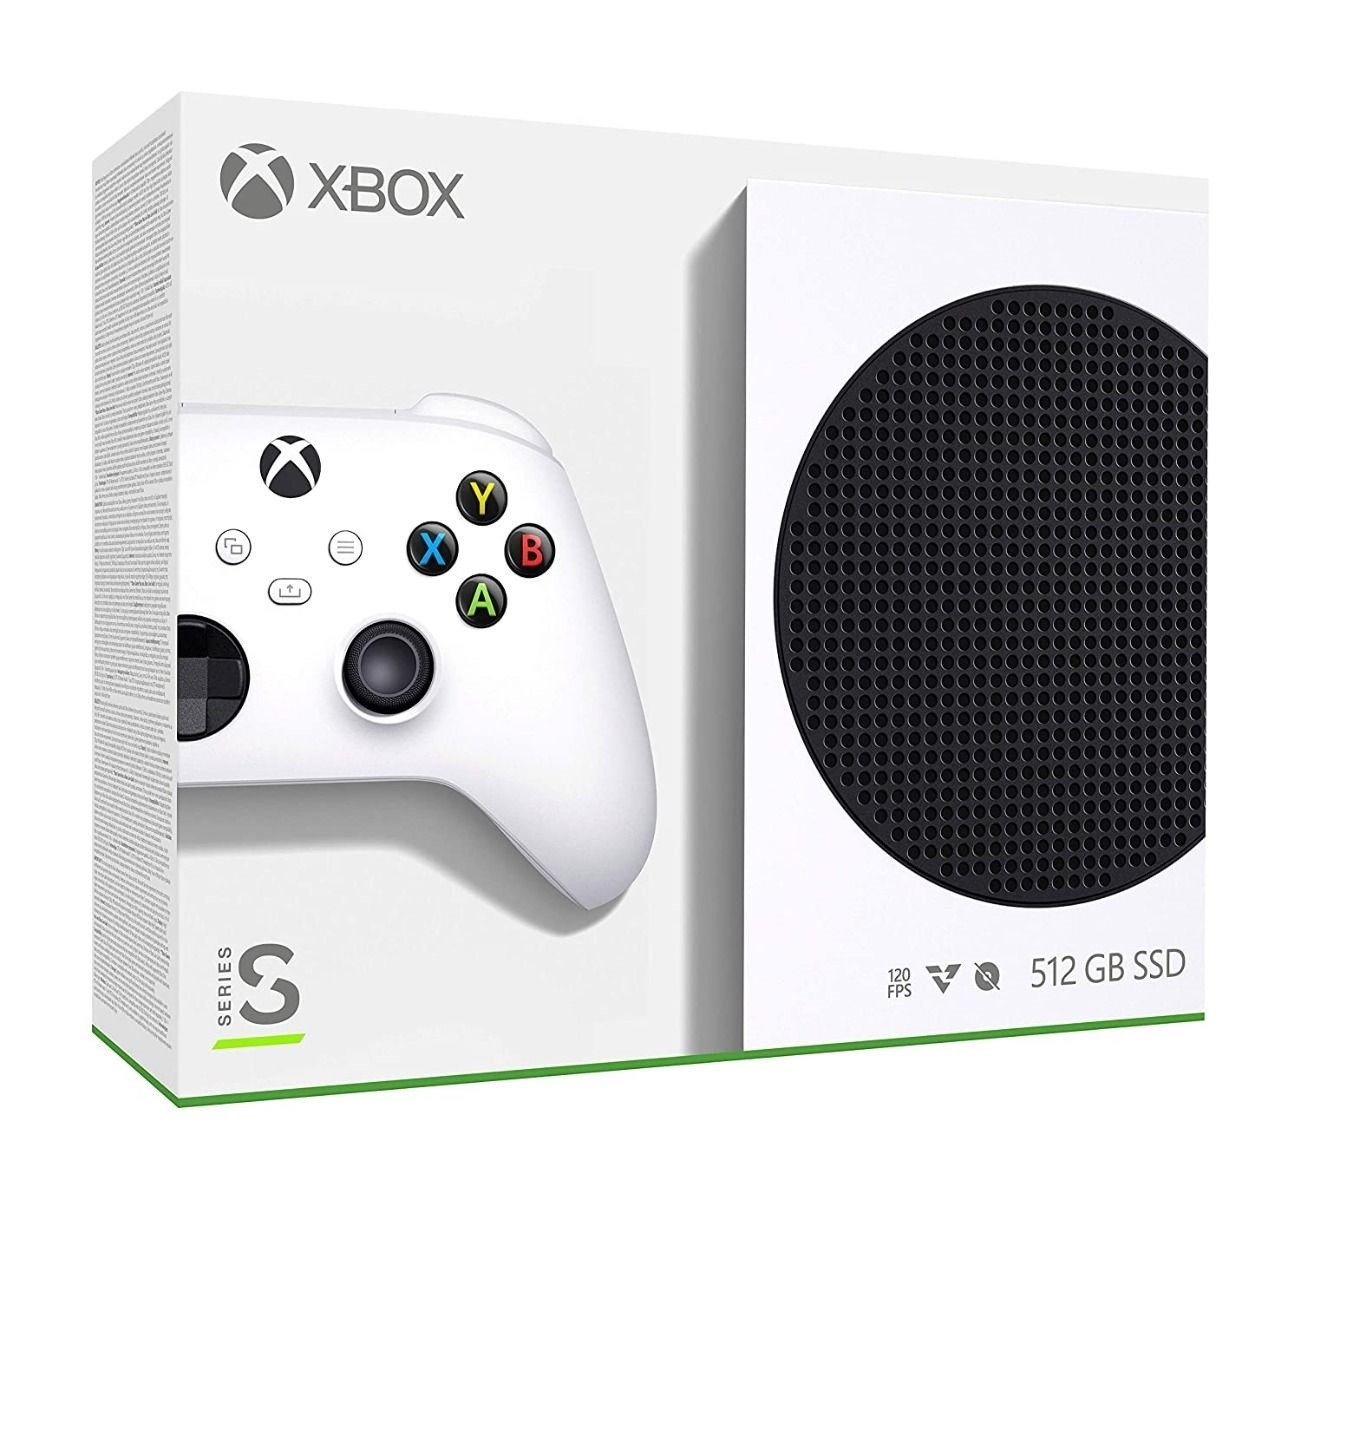 2020 New Xbox 512GB SSD Console -Robot White - image 4 of 5